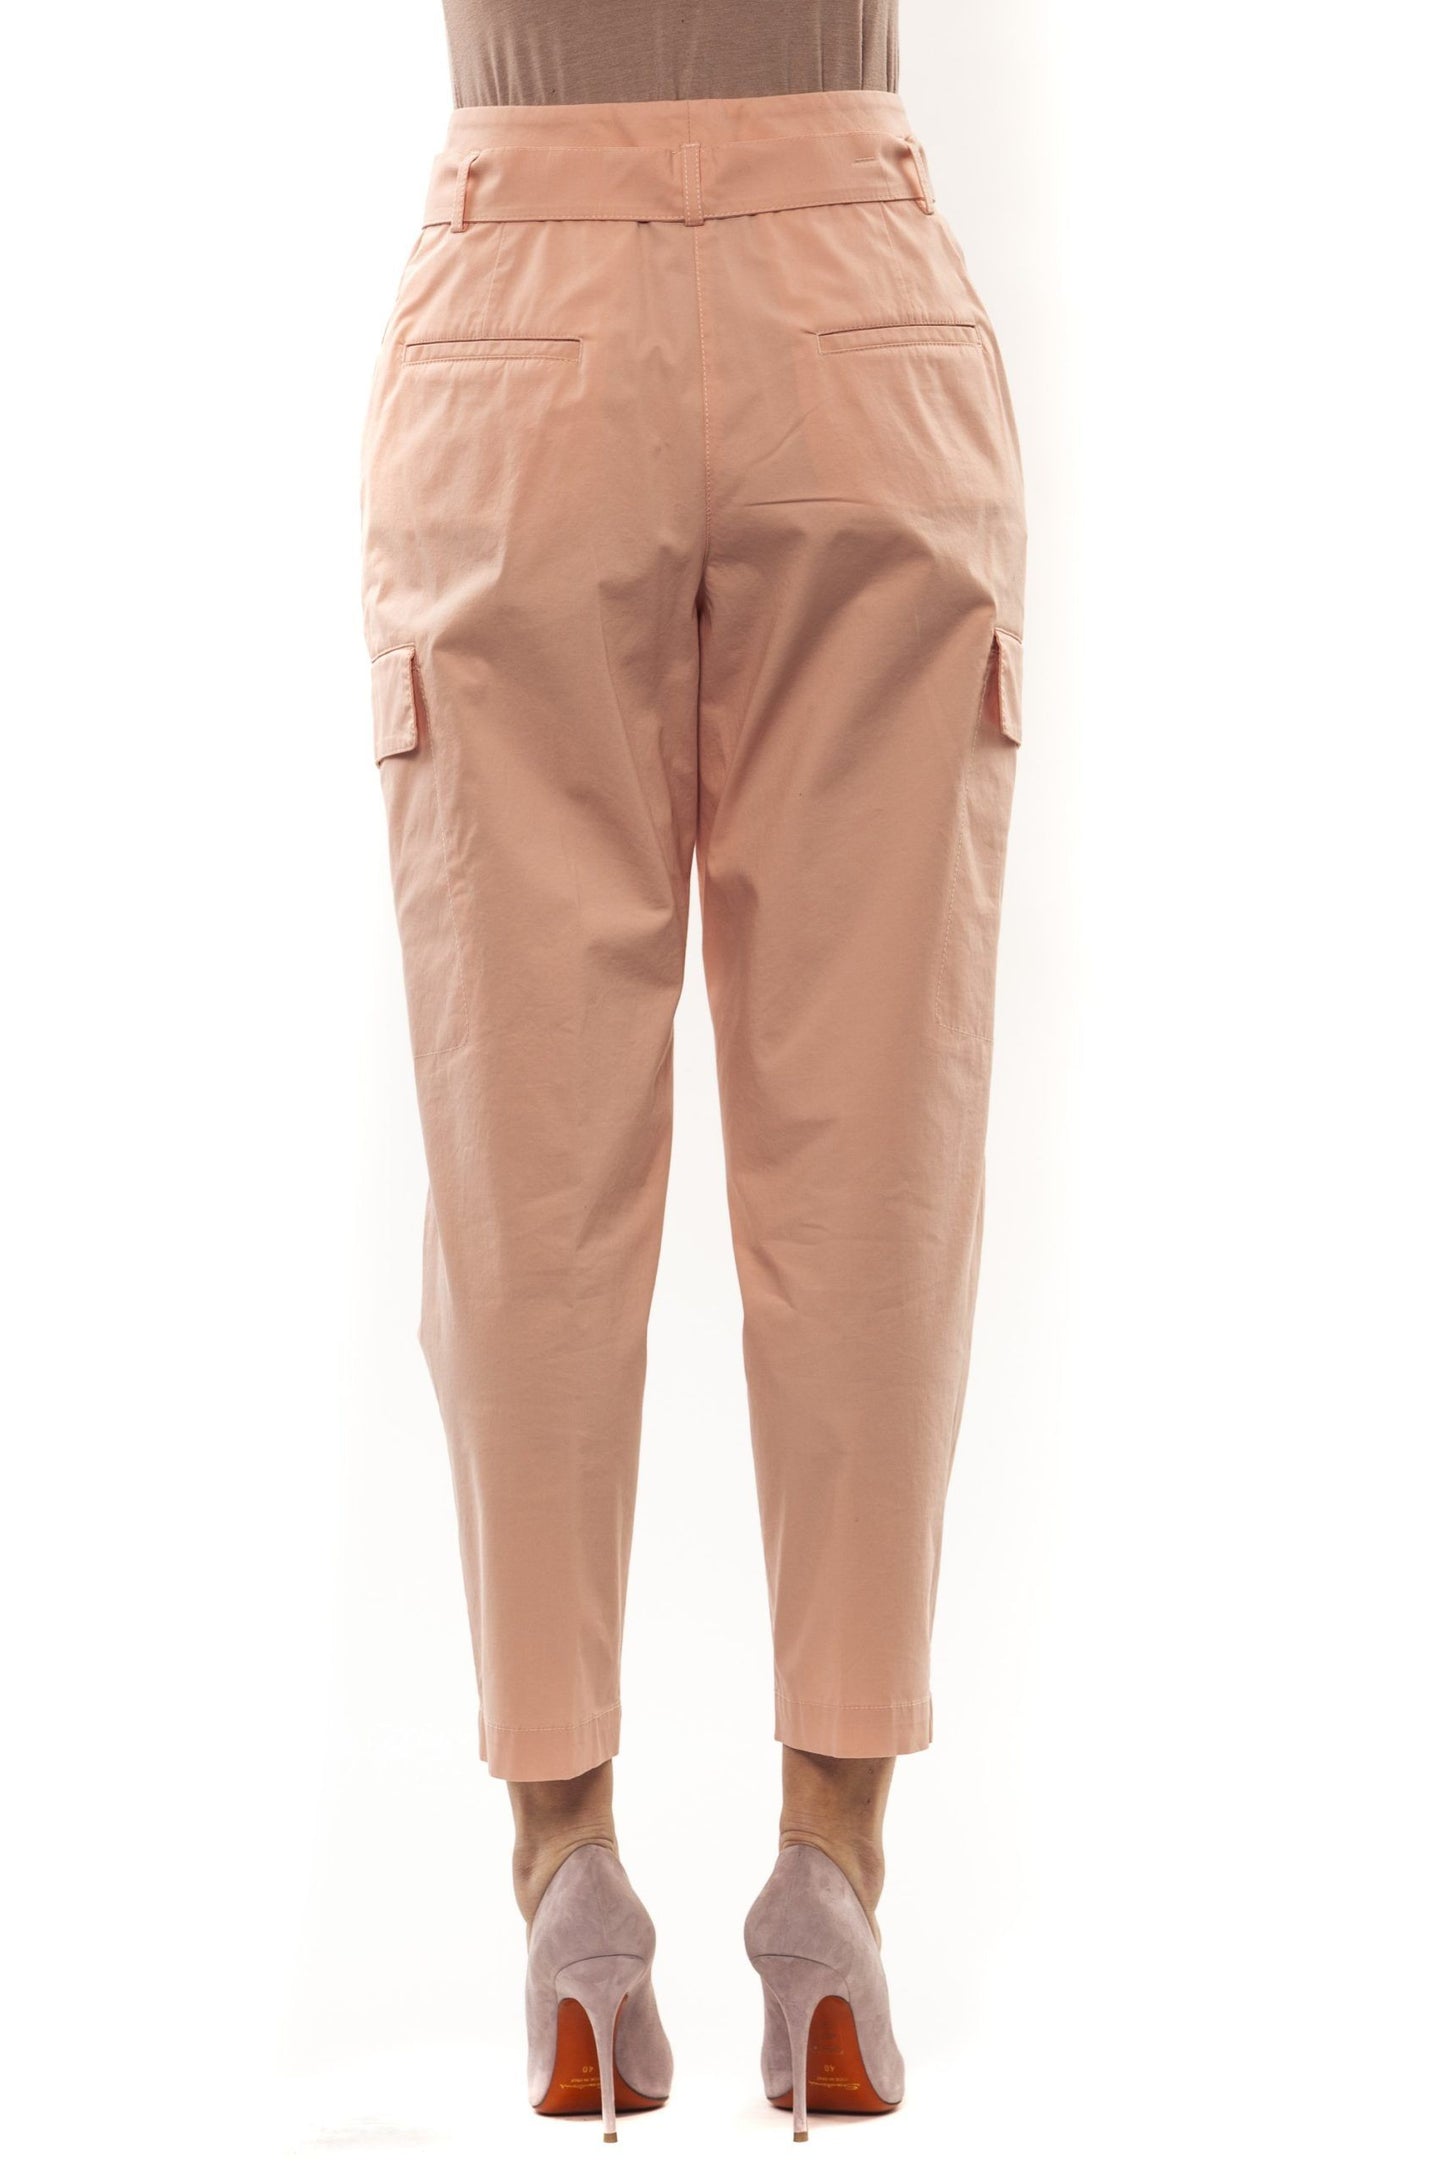 Pastel Pink High Waisted Cotton Trousers